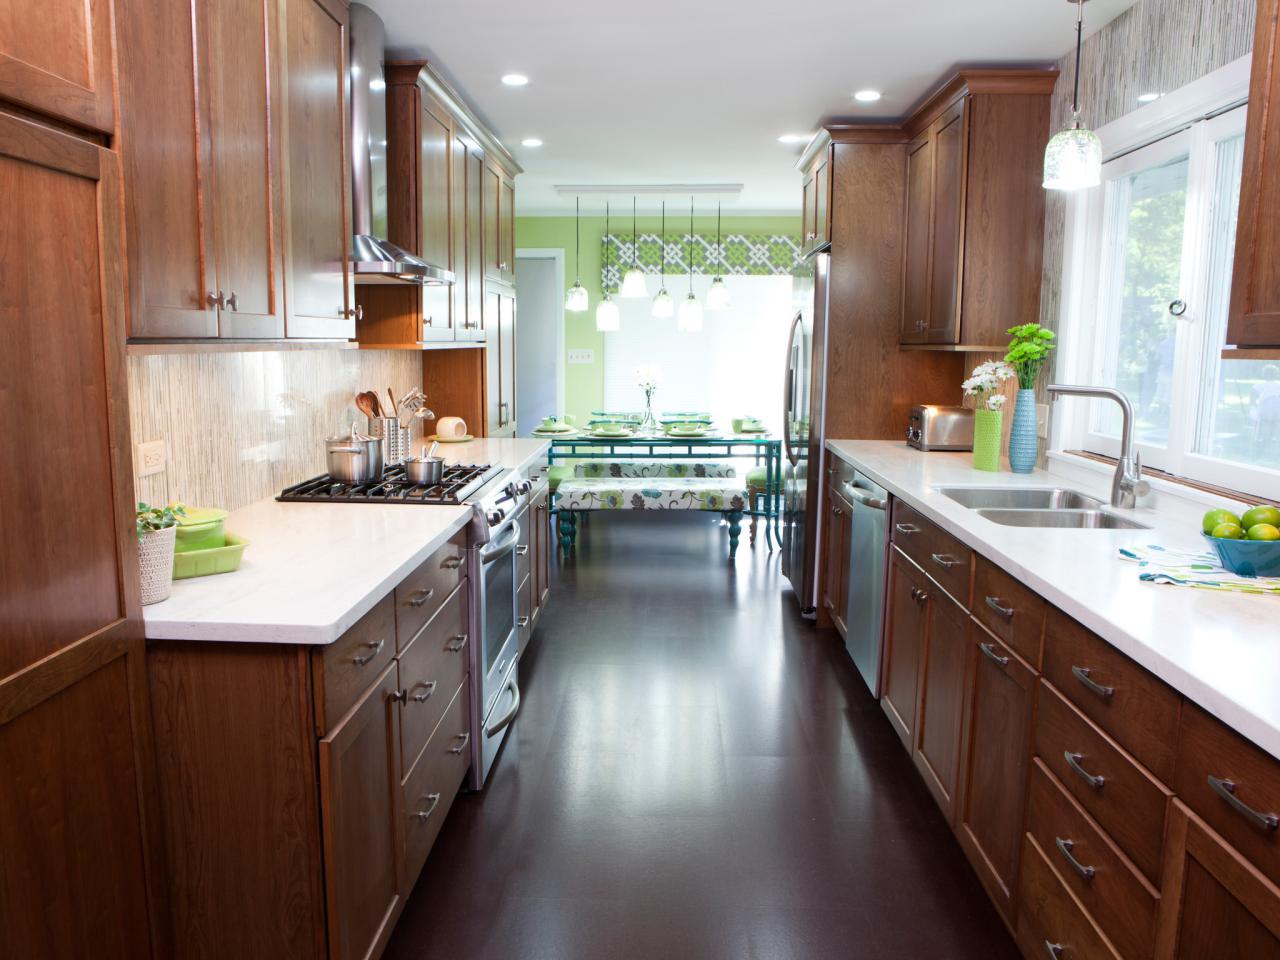 Things To Consider cherry wood cabinets, maple wood cabinets, and reddish brown wood veneer